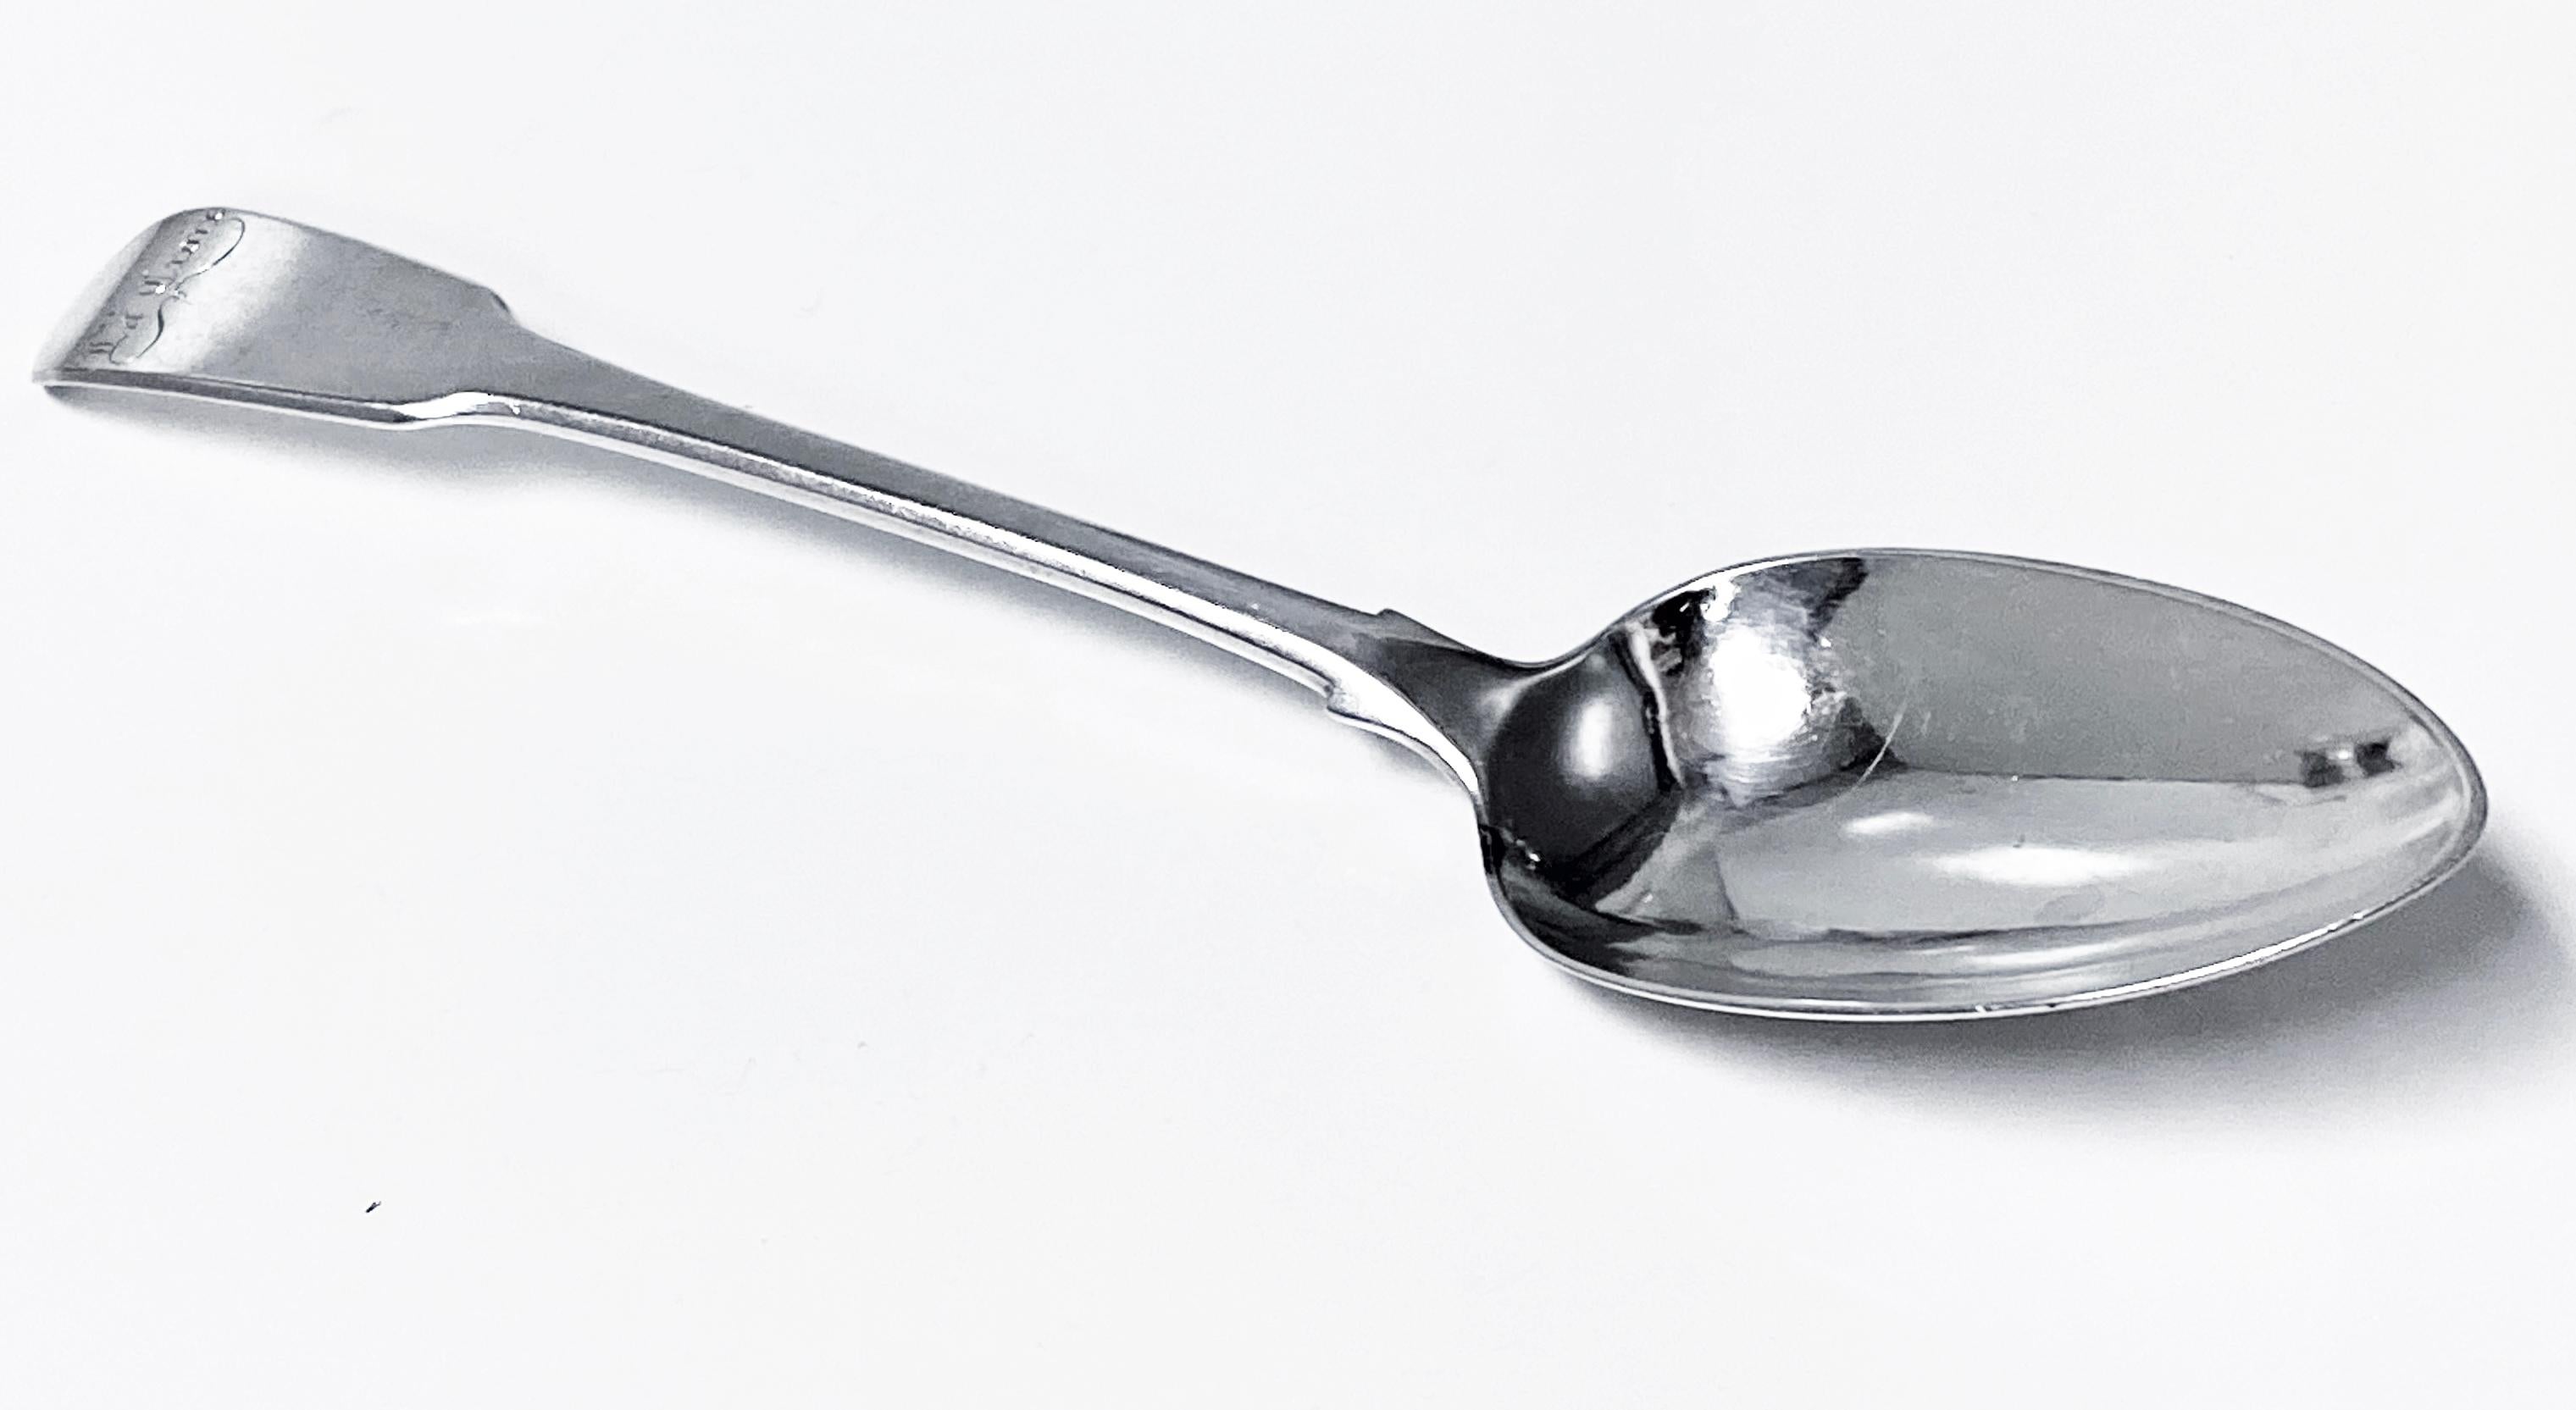 Georgian Silver Peter and William Bateman Spoon London 1809. Fiddle pattern, engraved La Croix. Length: 8.75 inches. Weight: 75.24 grams. Very good condition and lovely patina. Reflections from photography only